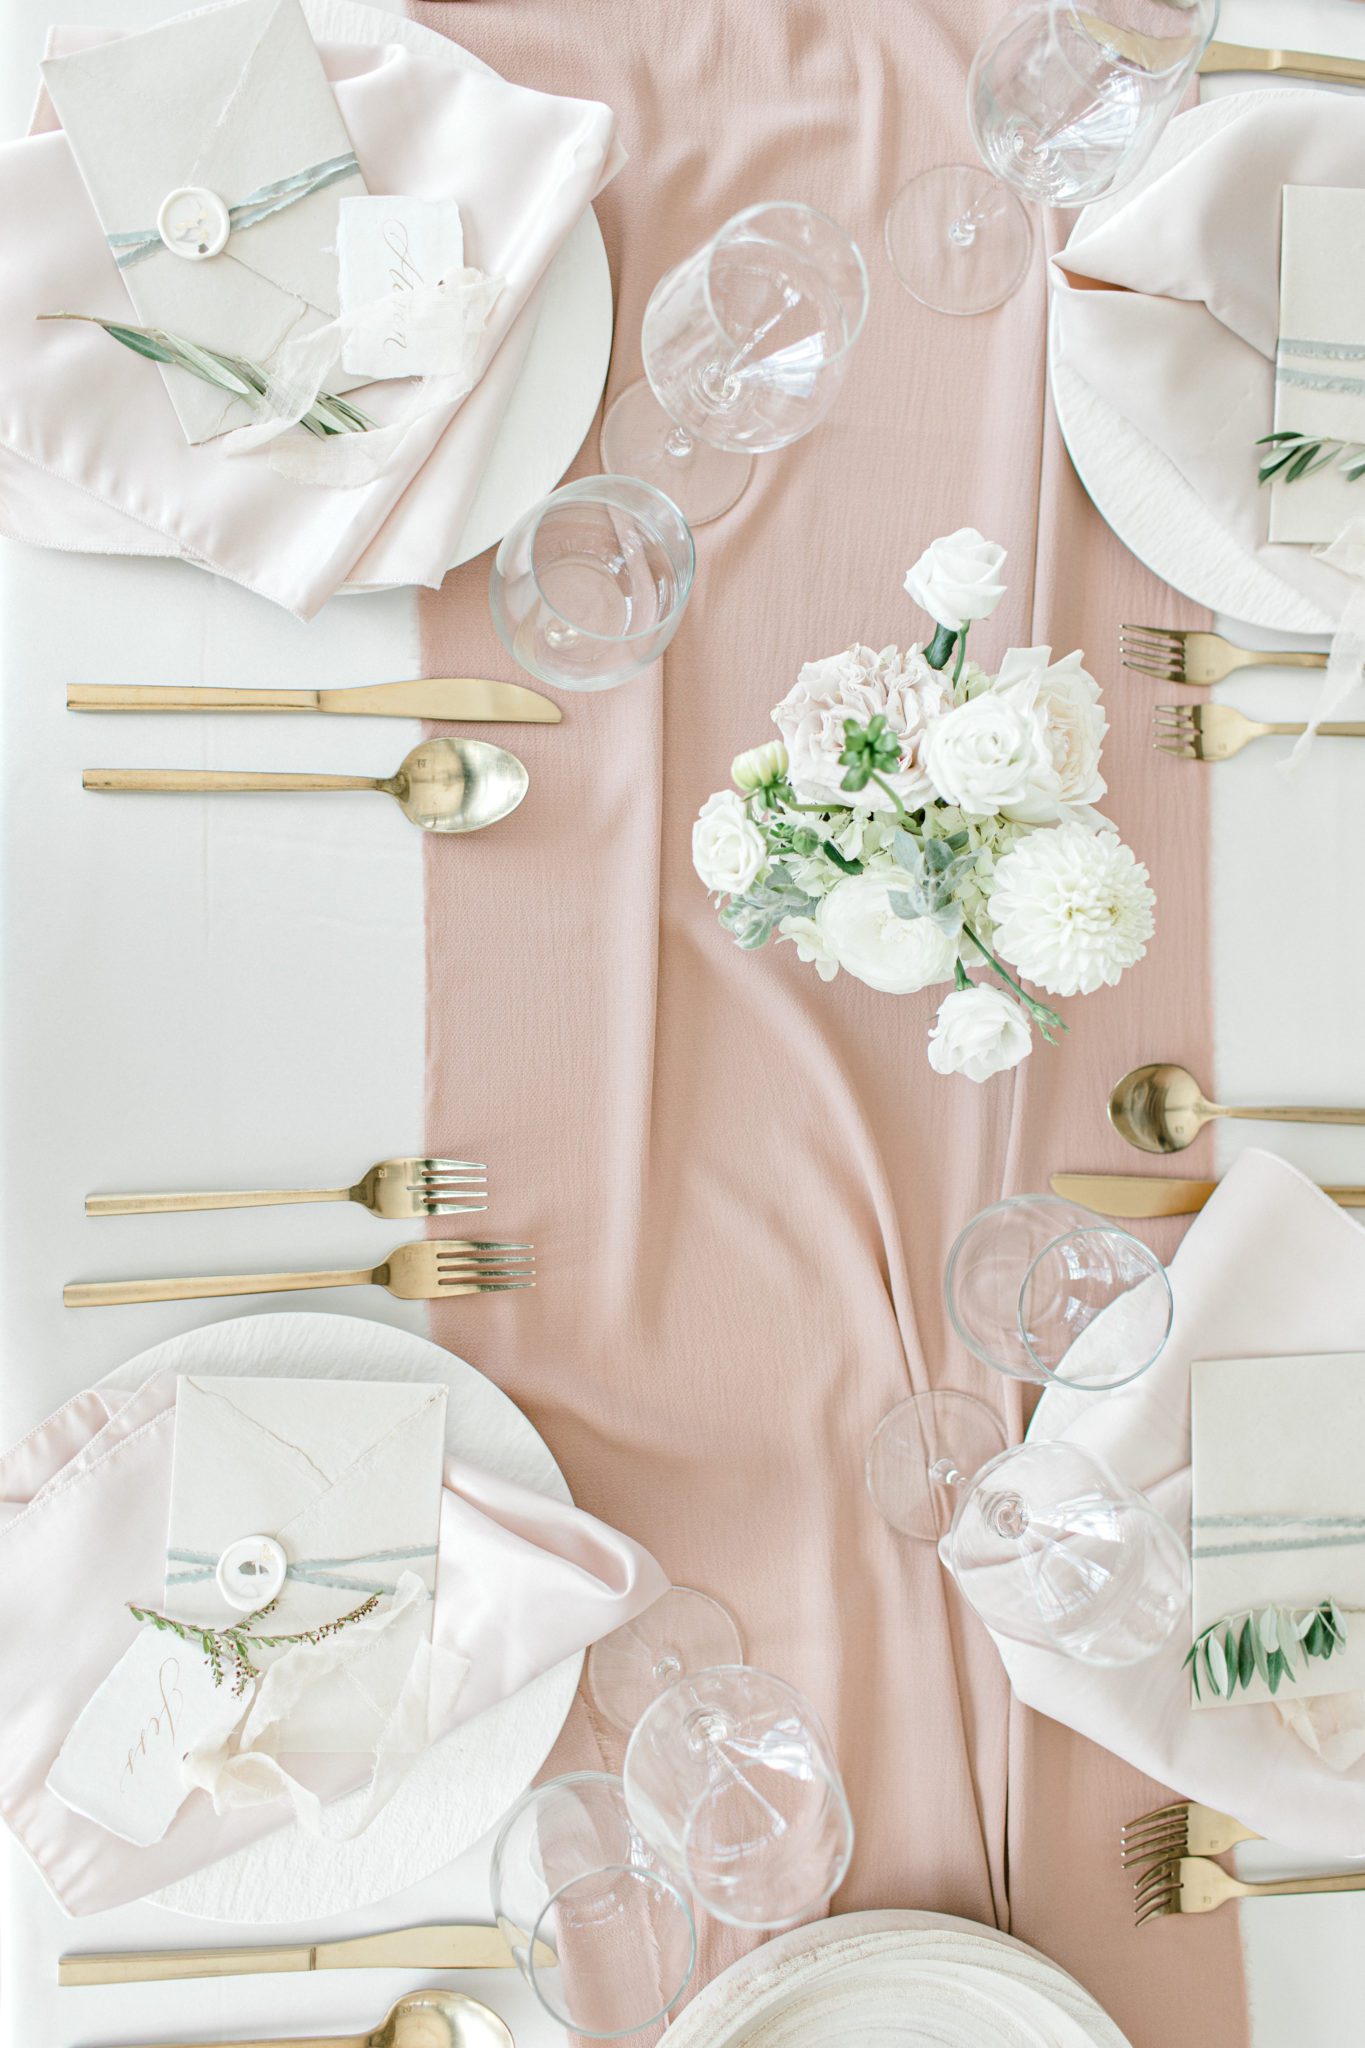 Wedding table photo above showcasing place settings, gold cutlery, blush linens, white and green florals and greenery, altogether a classic yet modern wedding table design